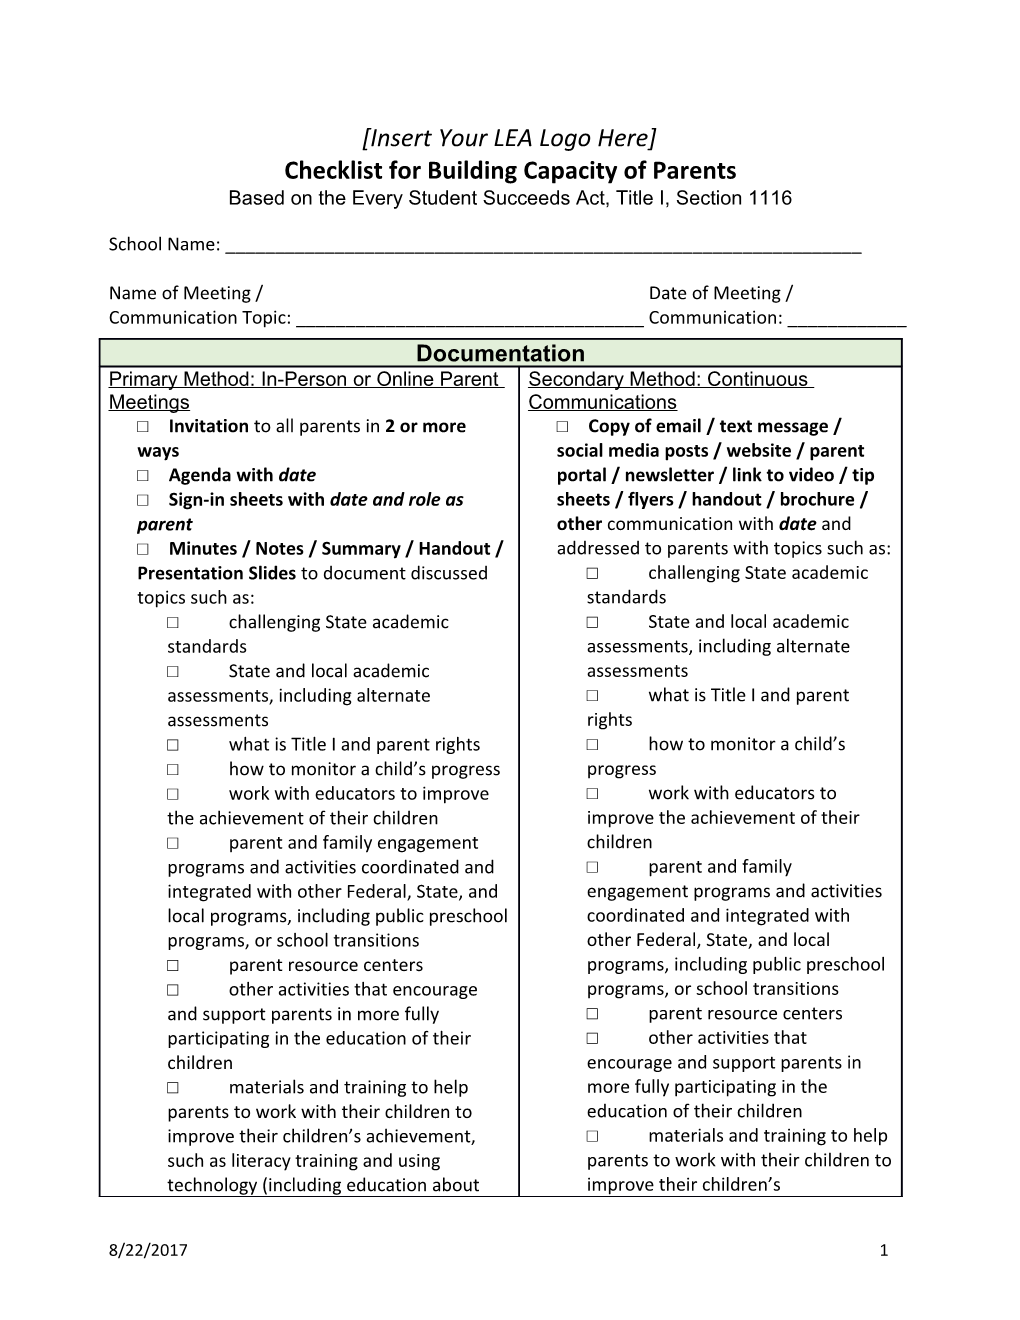 Checklist for Building Capacity of Parents